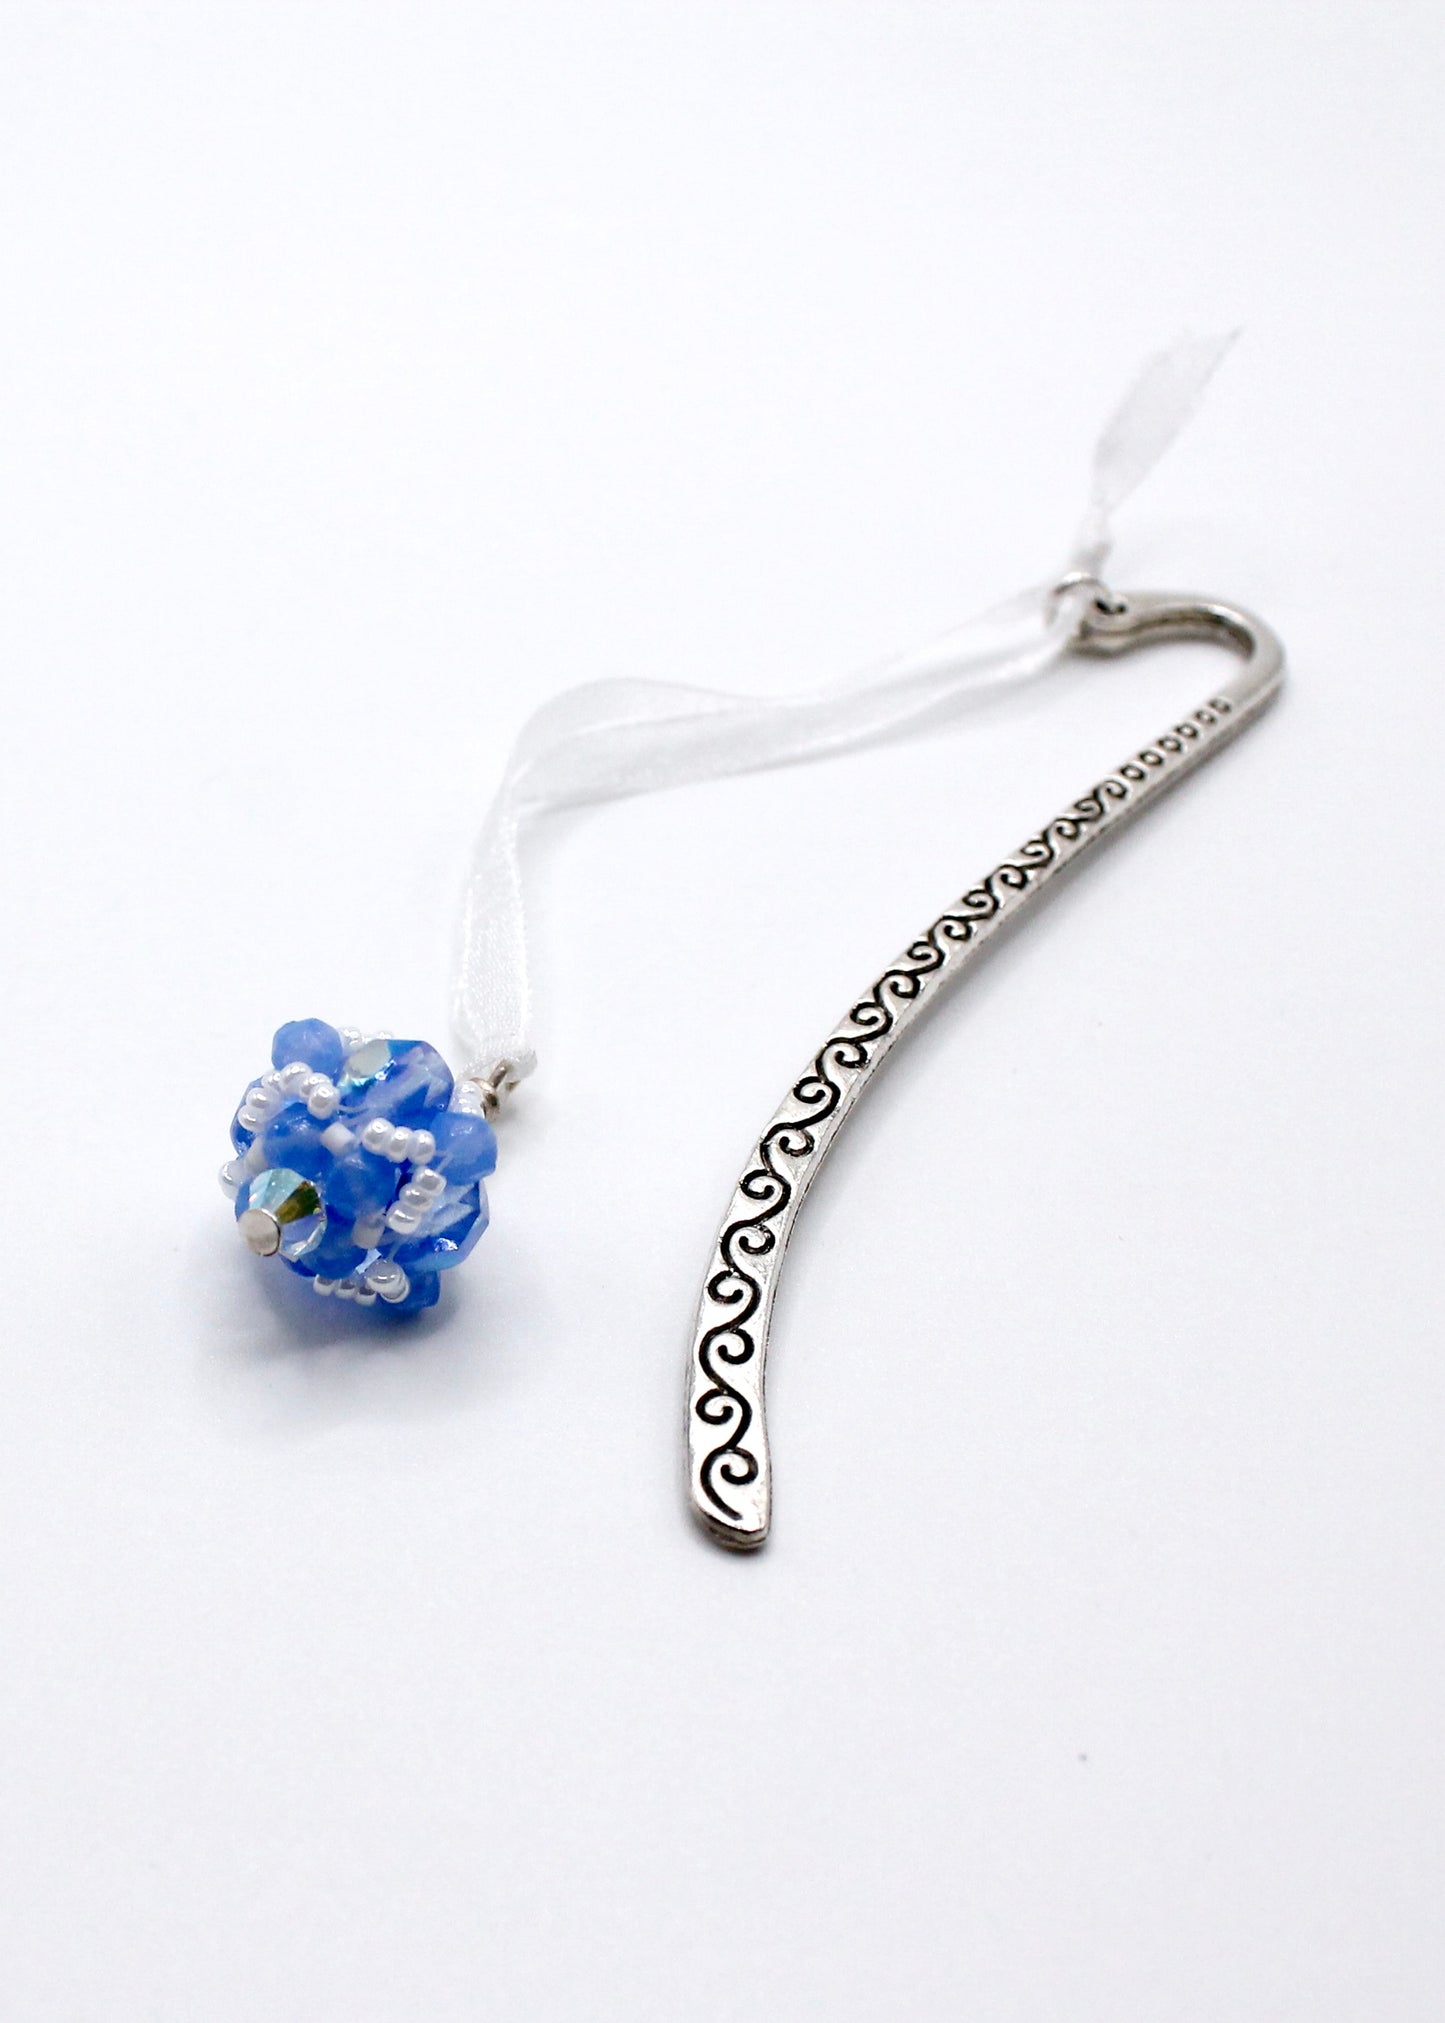 Light blue hand sewn beaded bookmark makes the perfect gift for a teacher and educator. Light blue is the official academic program color for education.